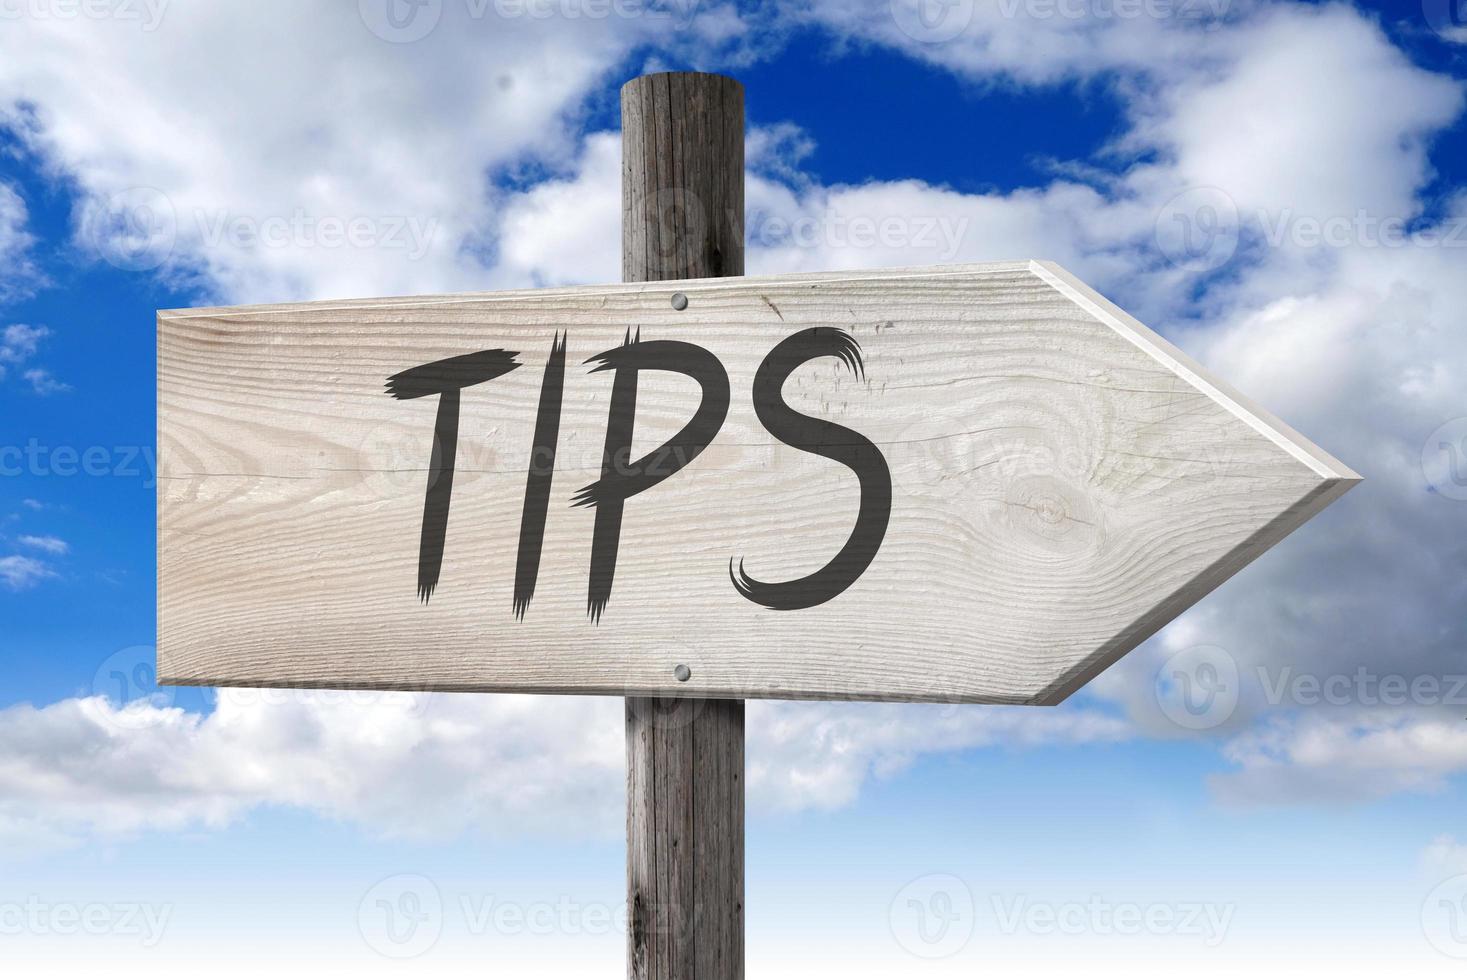 Tips - Wooden Signpost with one Arrow and Cloudy Sky in Background photo